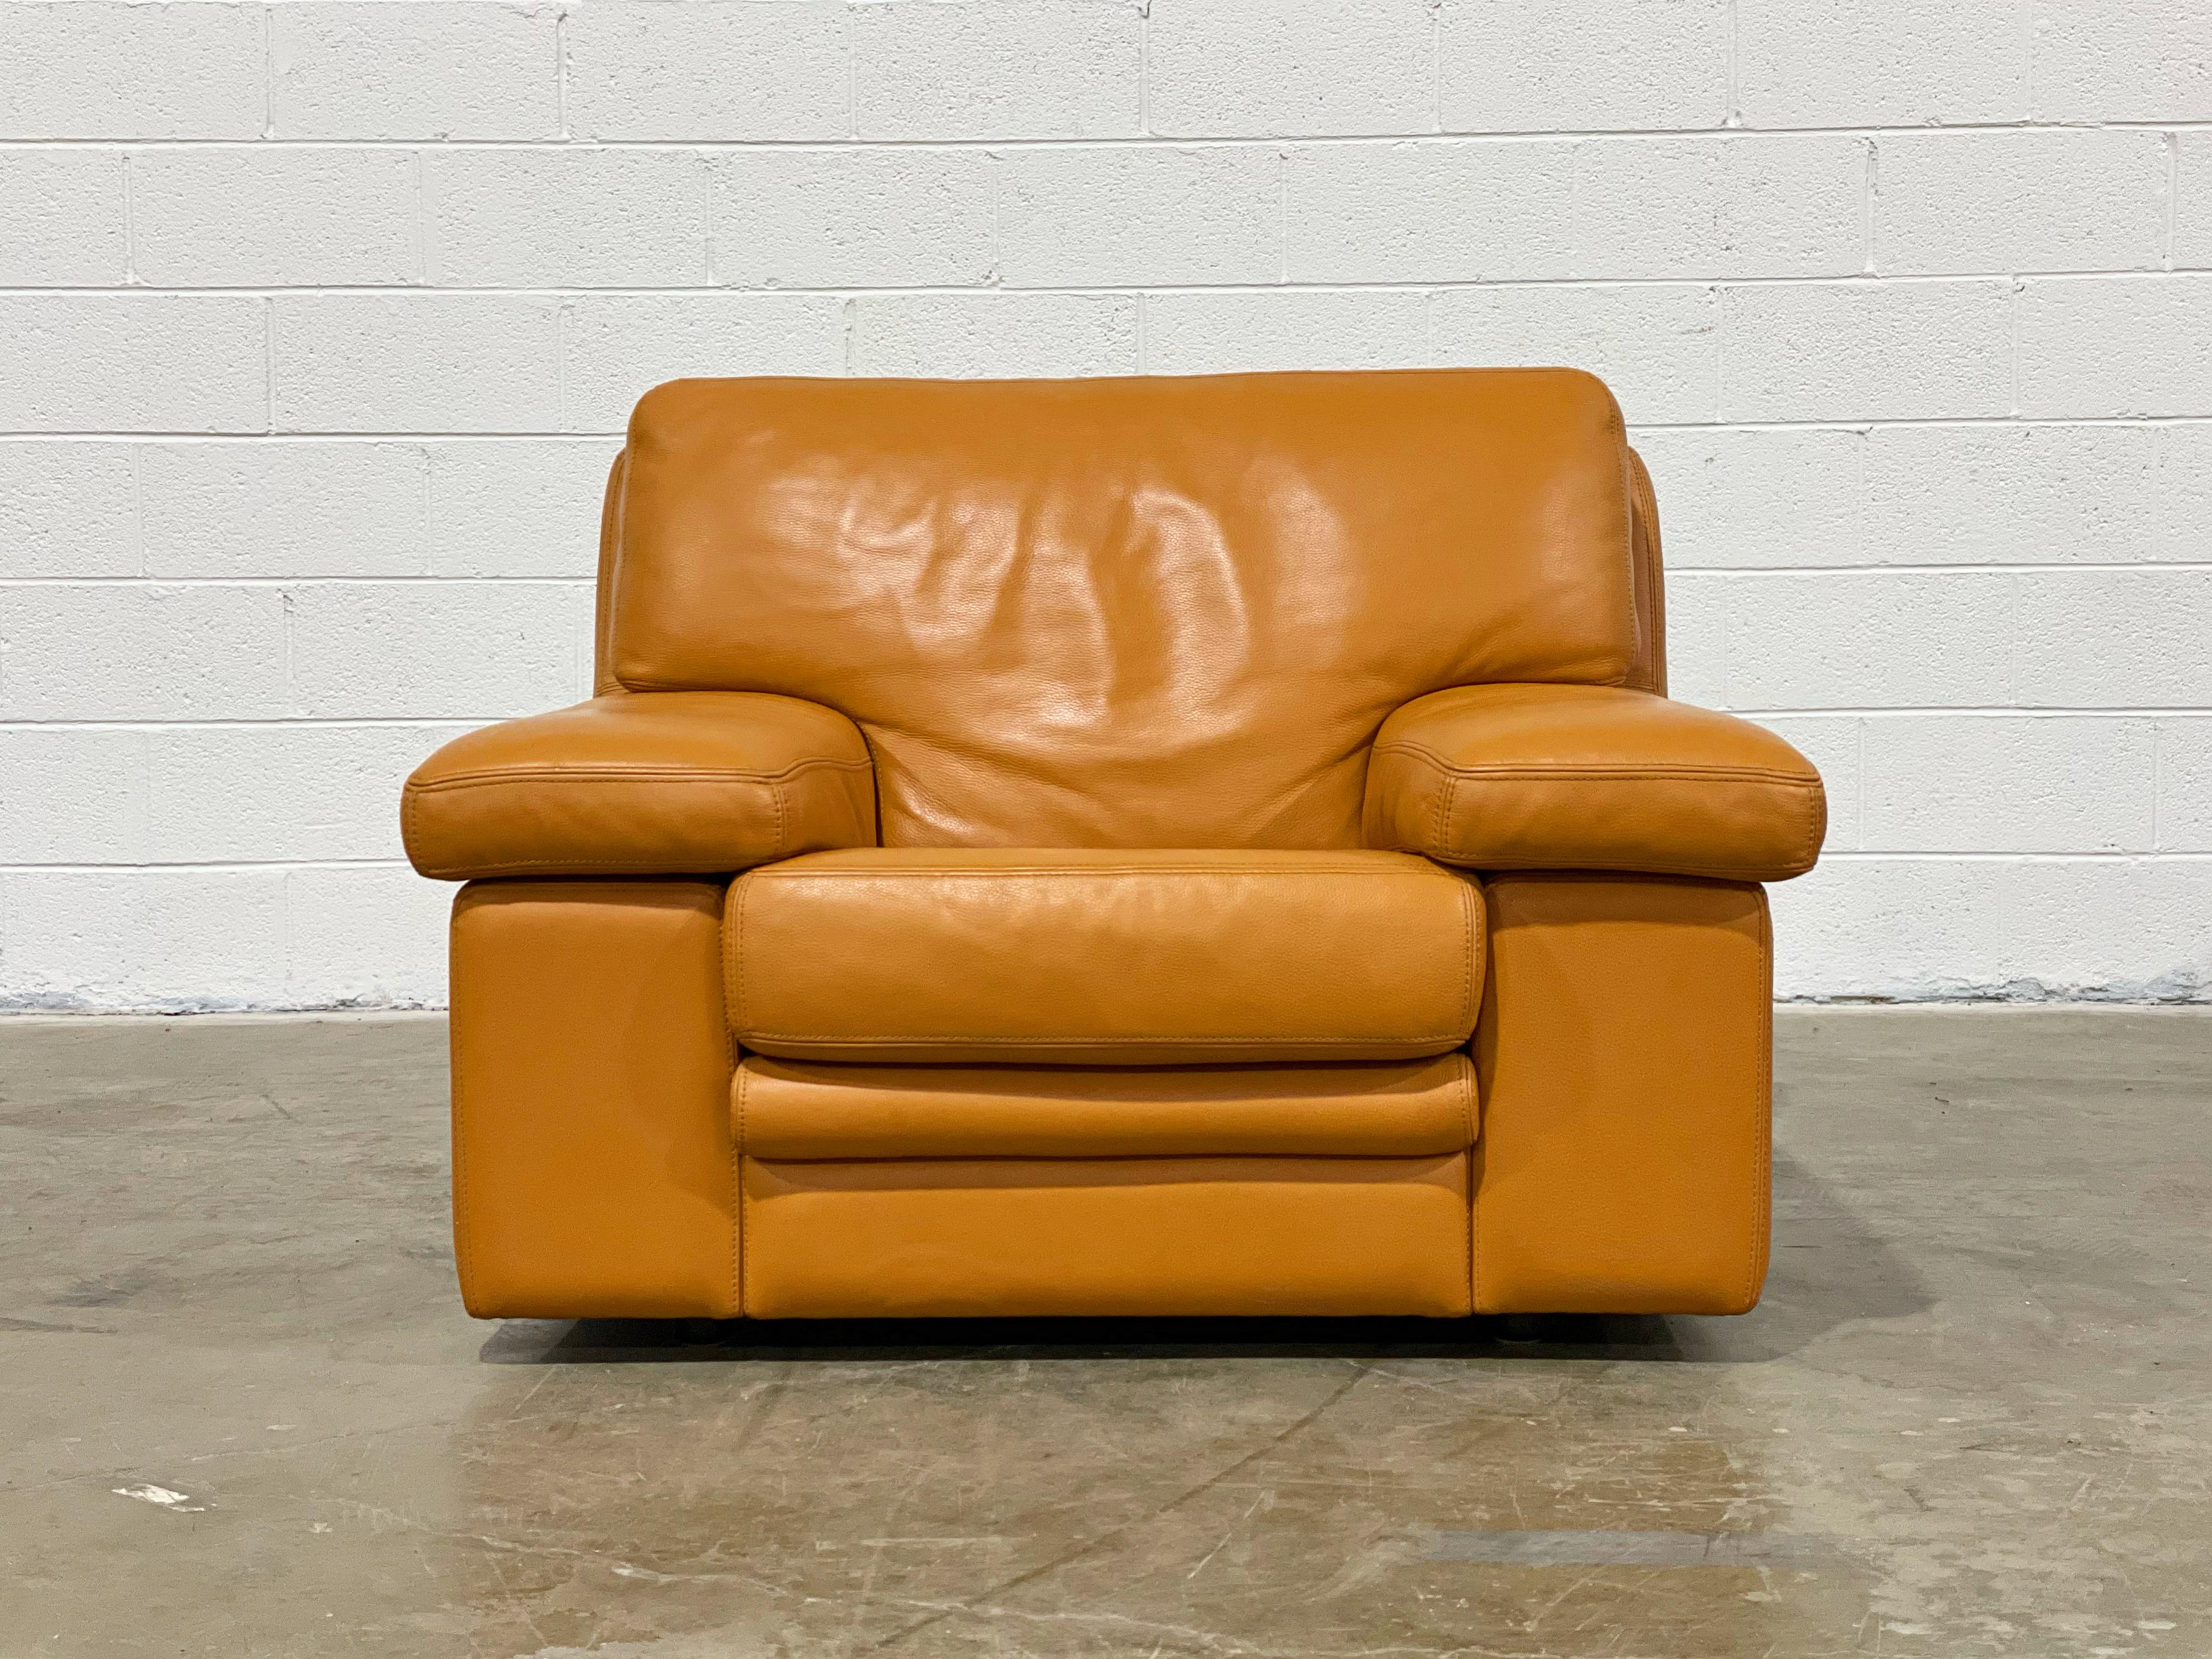 French Roche Bobois Vintage Post Modern Leather Club Chair, Butterscotch Tone Leather